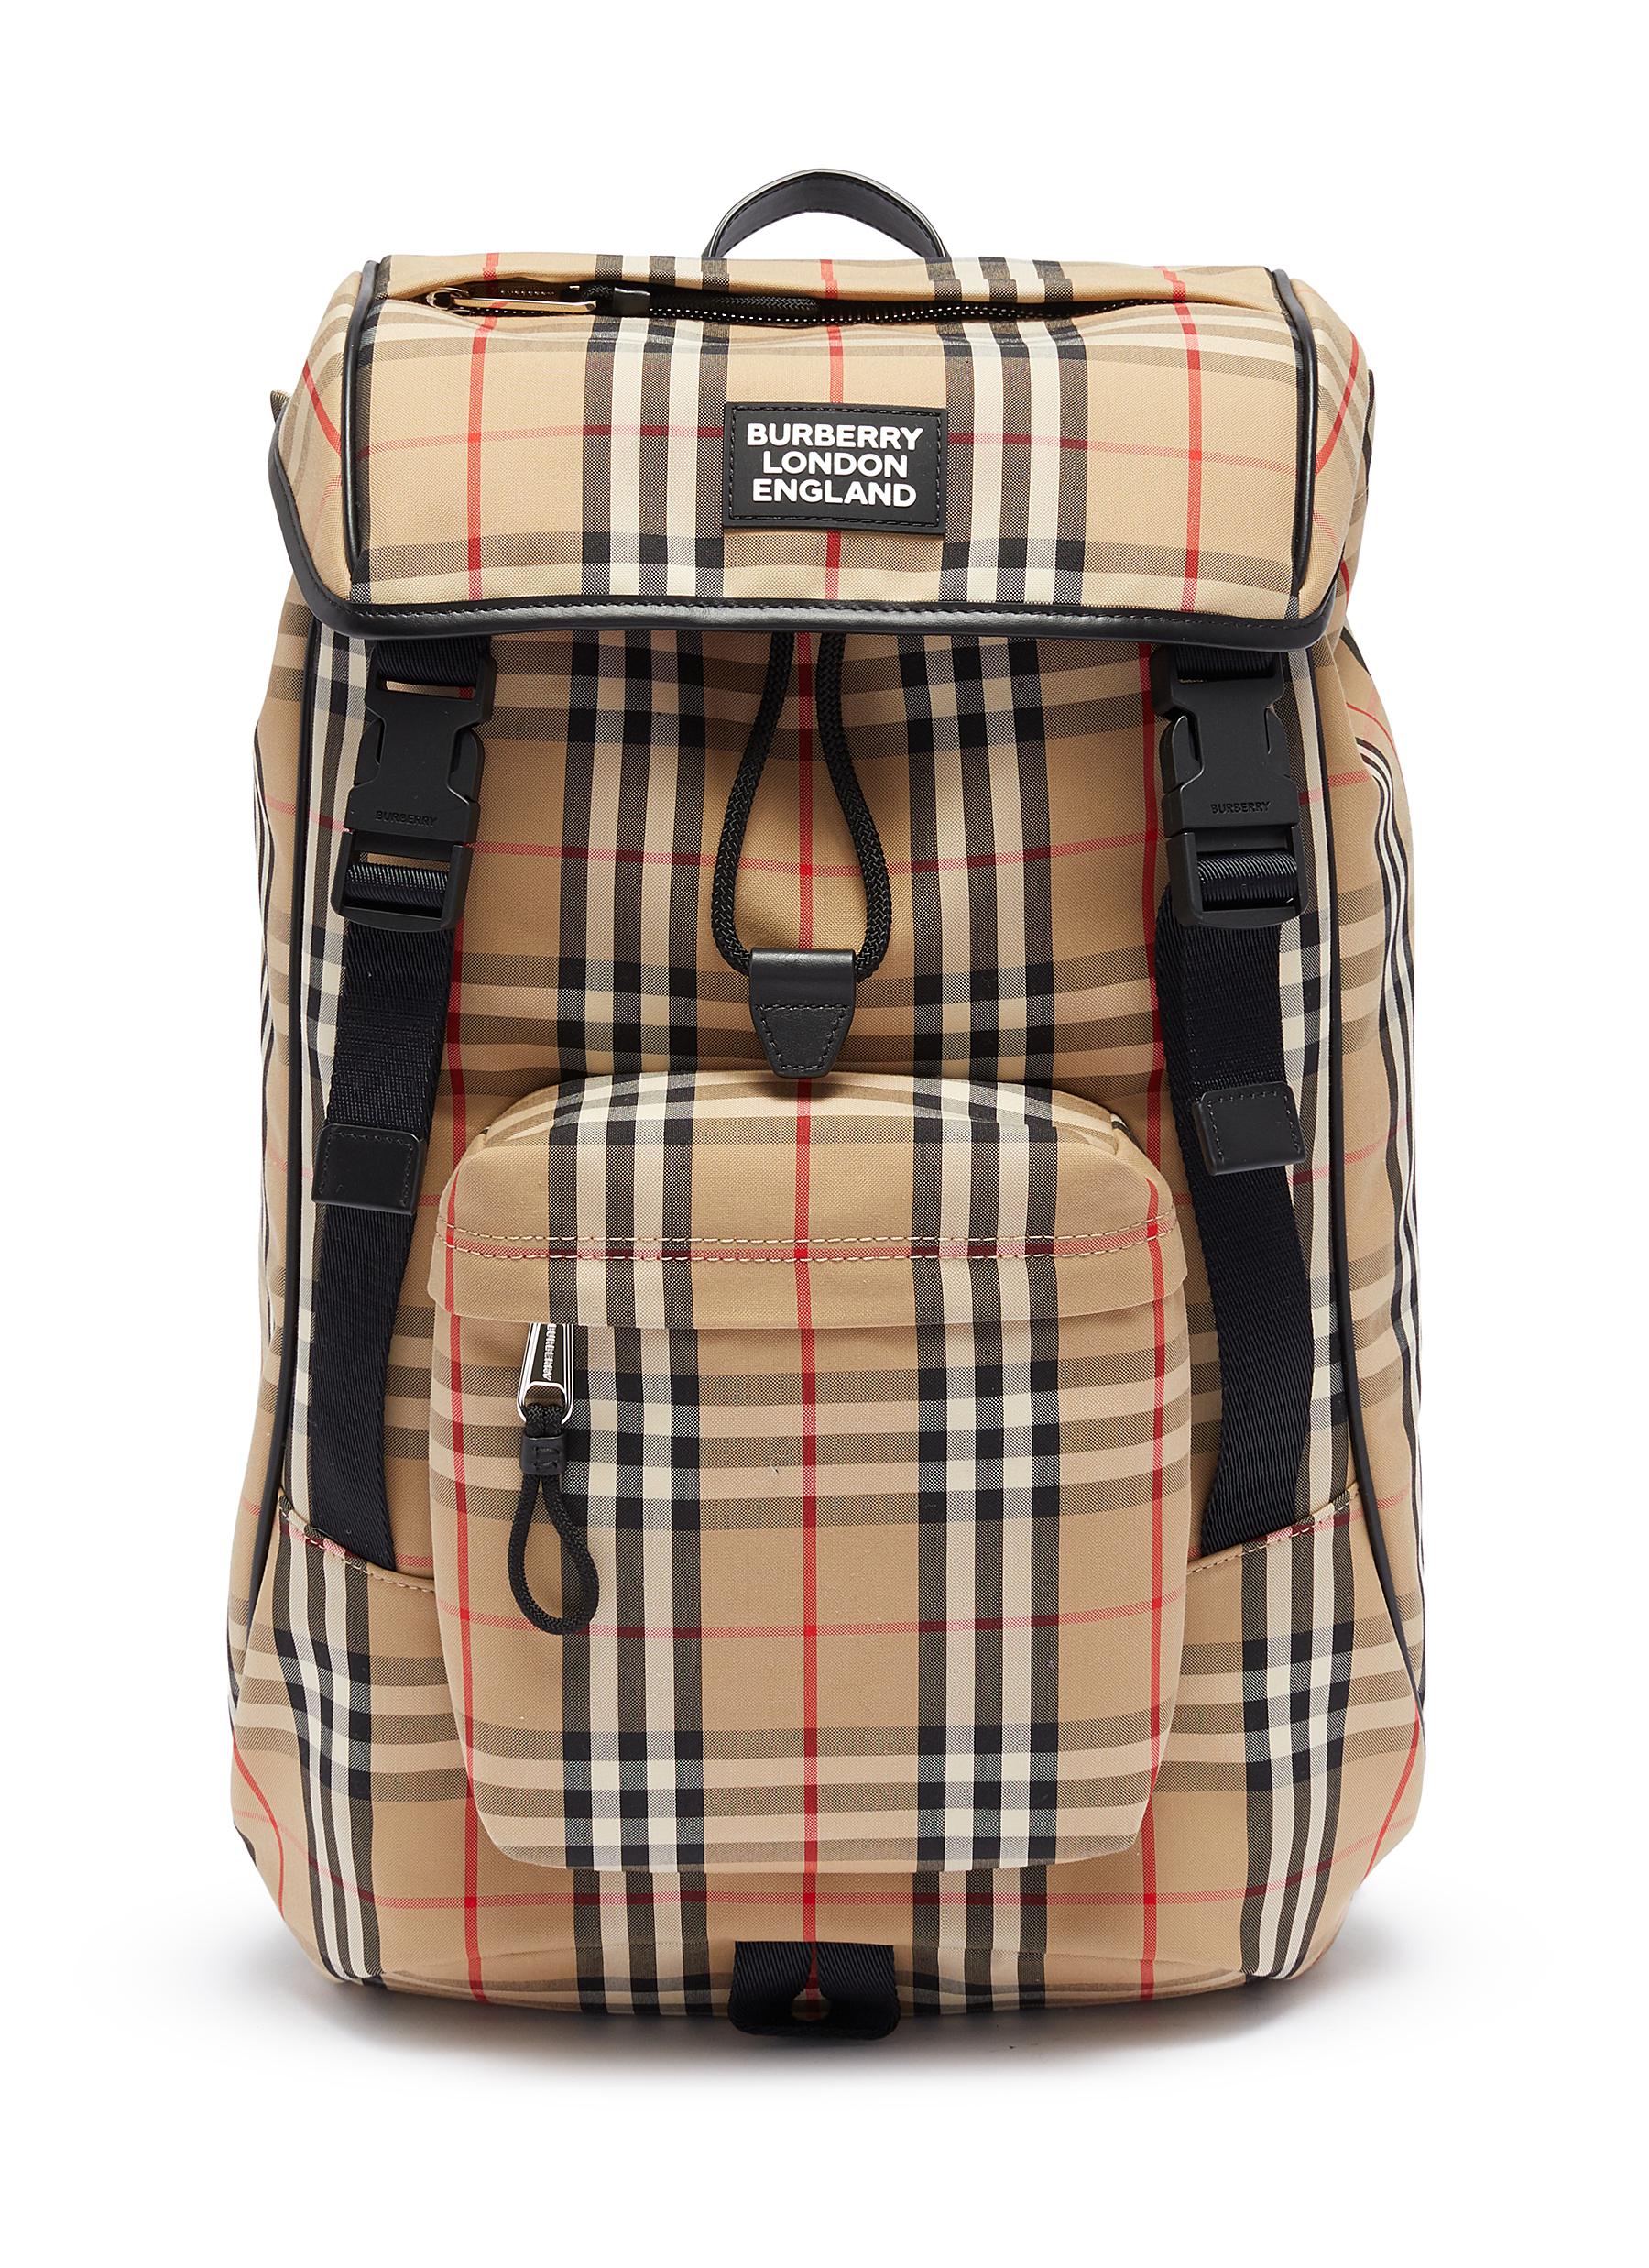 burberry london backpack